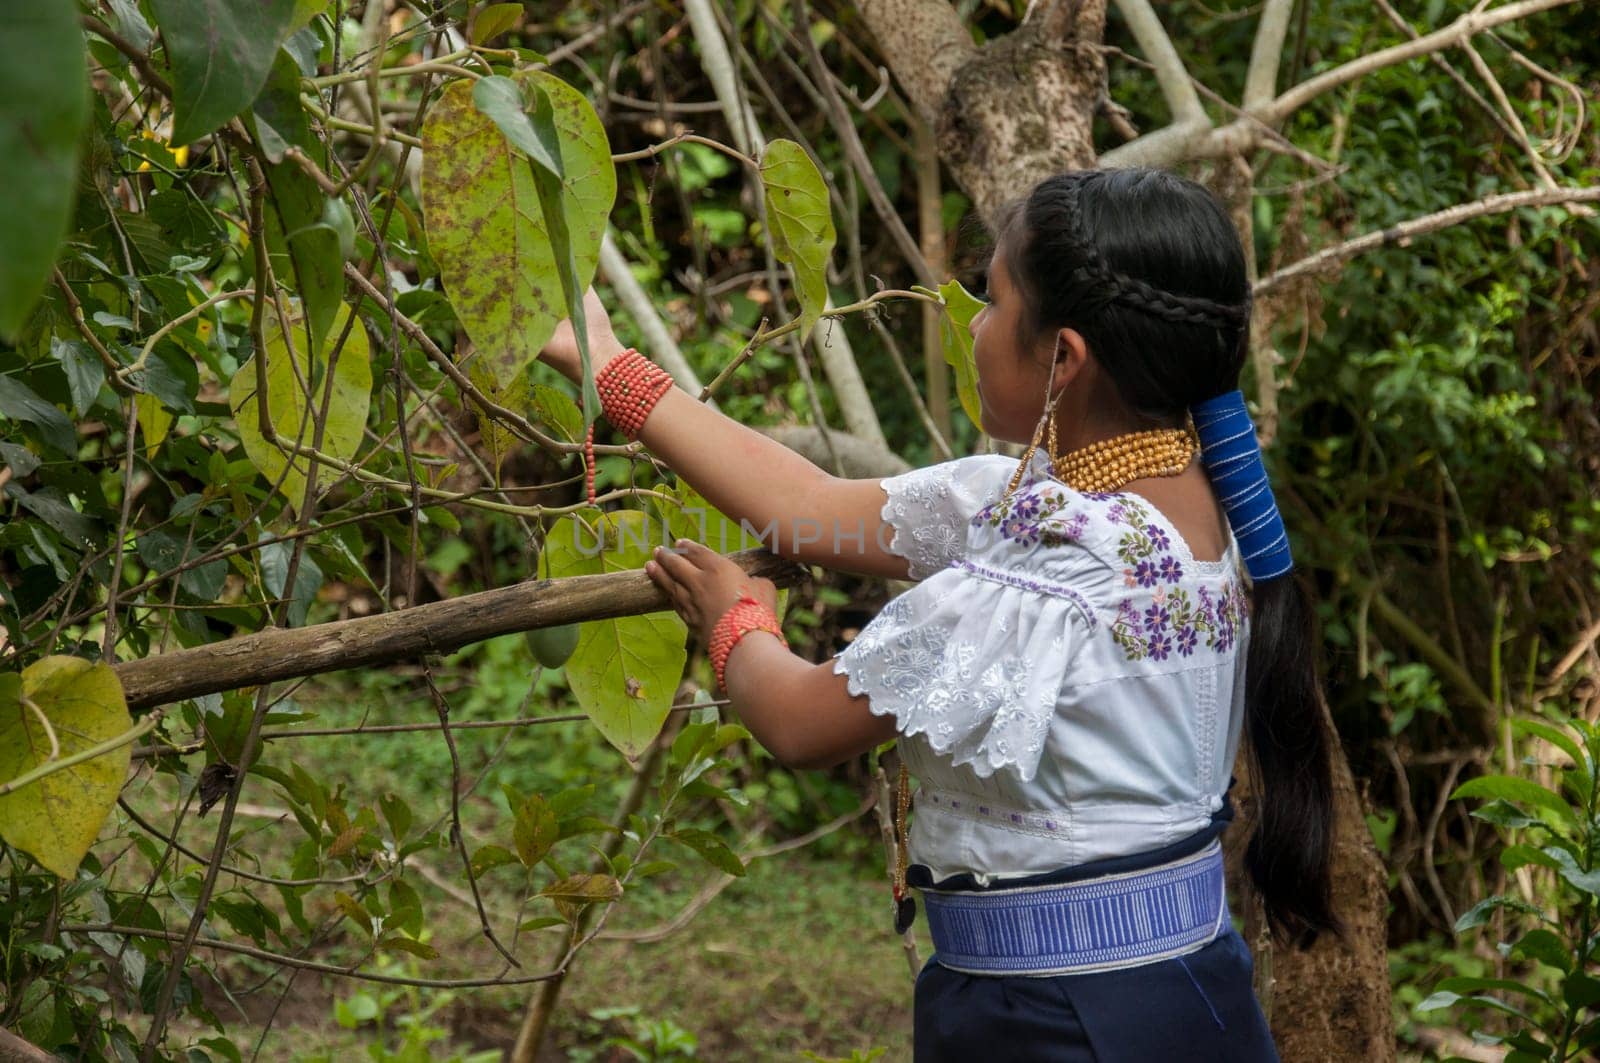 Jungle Harvest: Indigenous Teen Gathering Forest Fruits for Her Rural Community by Raulmartin